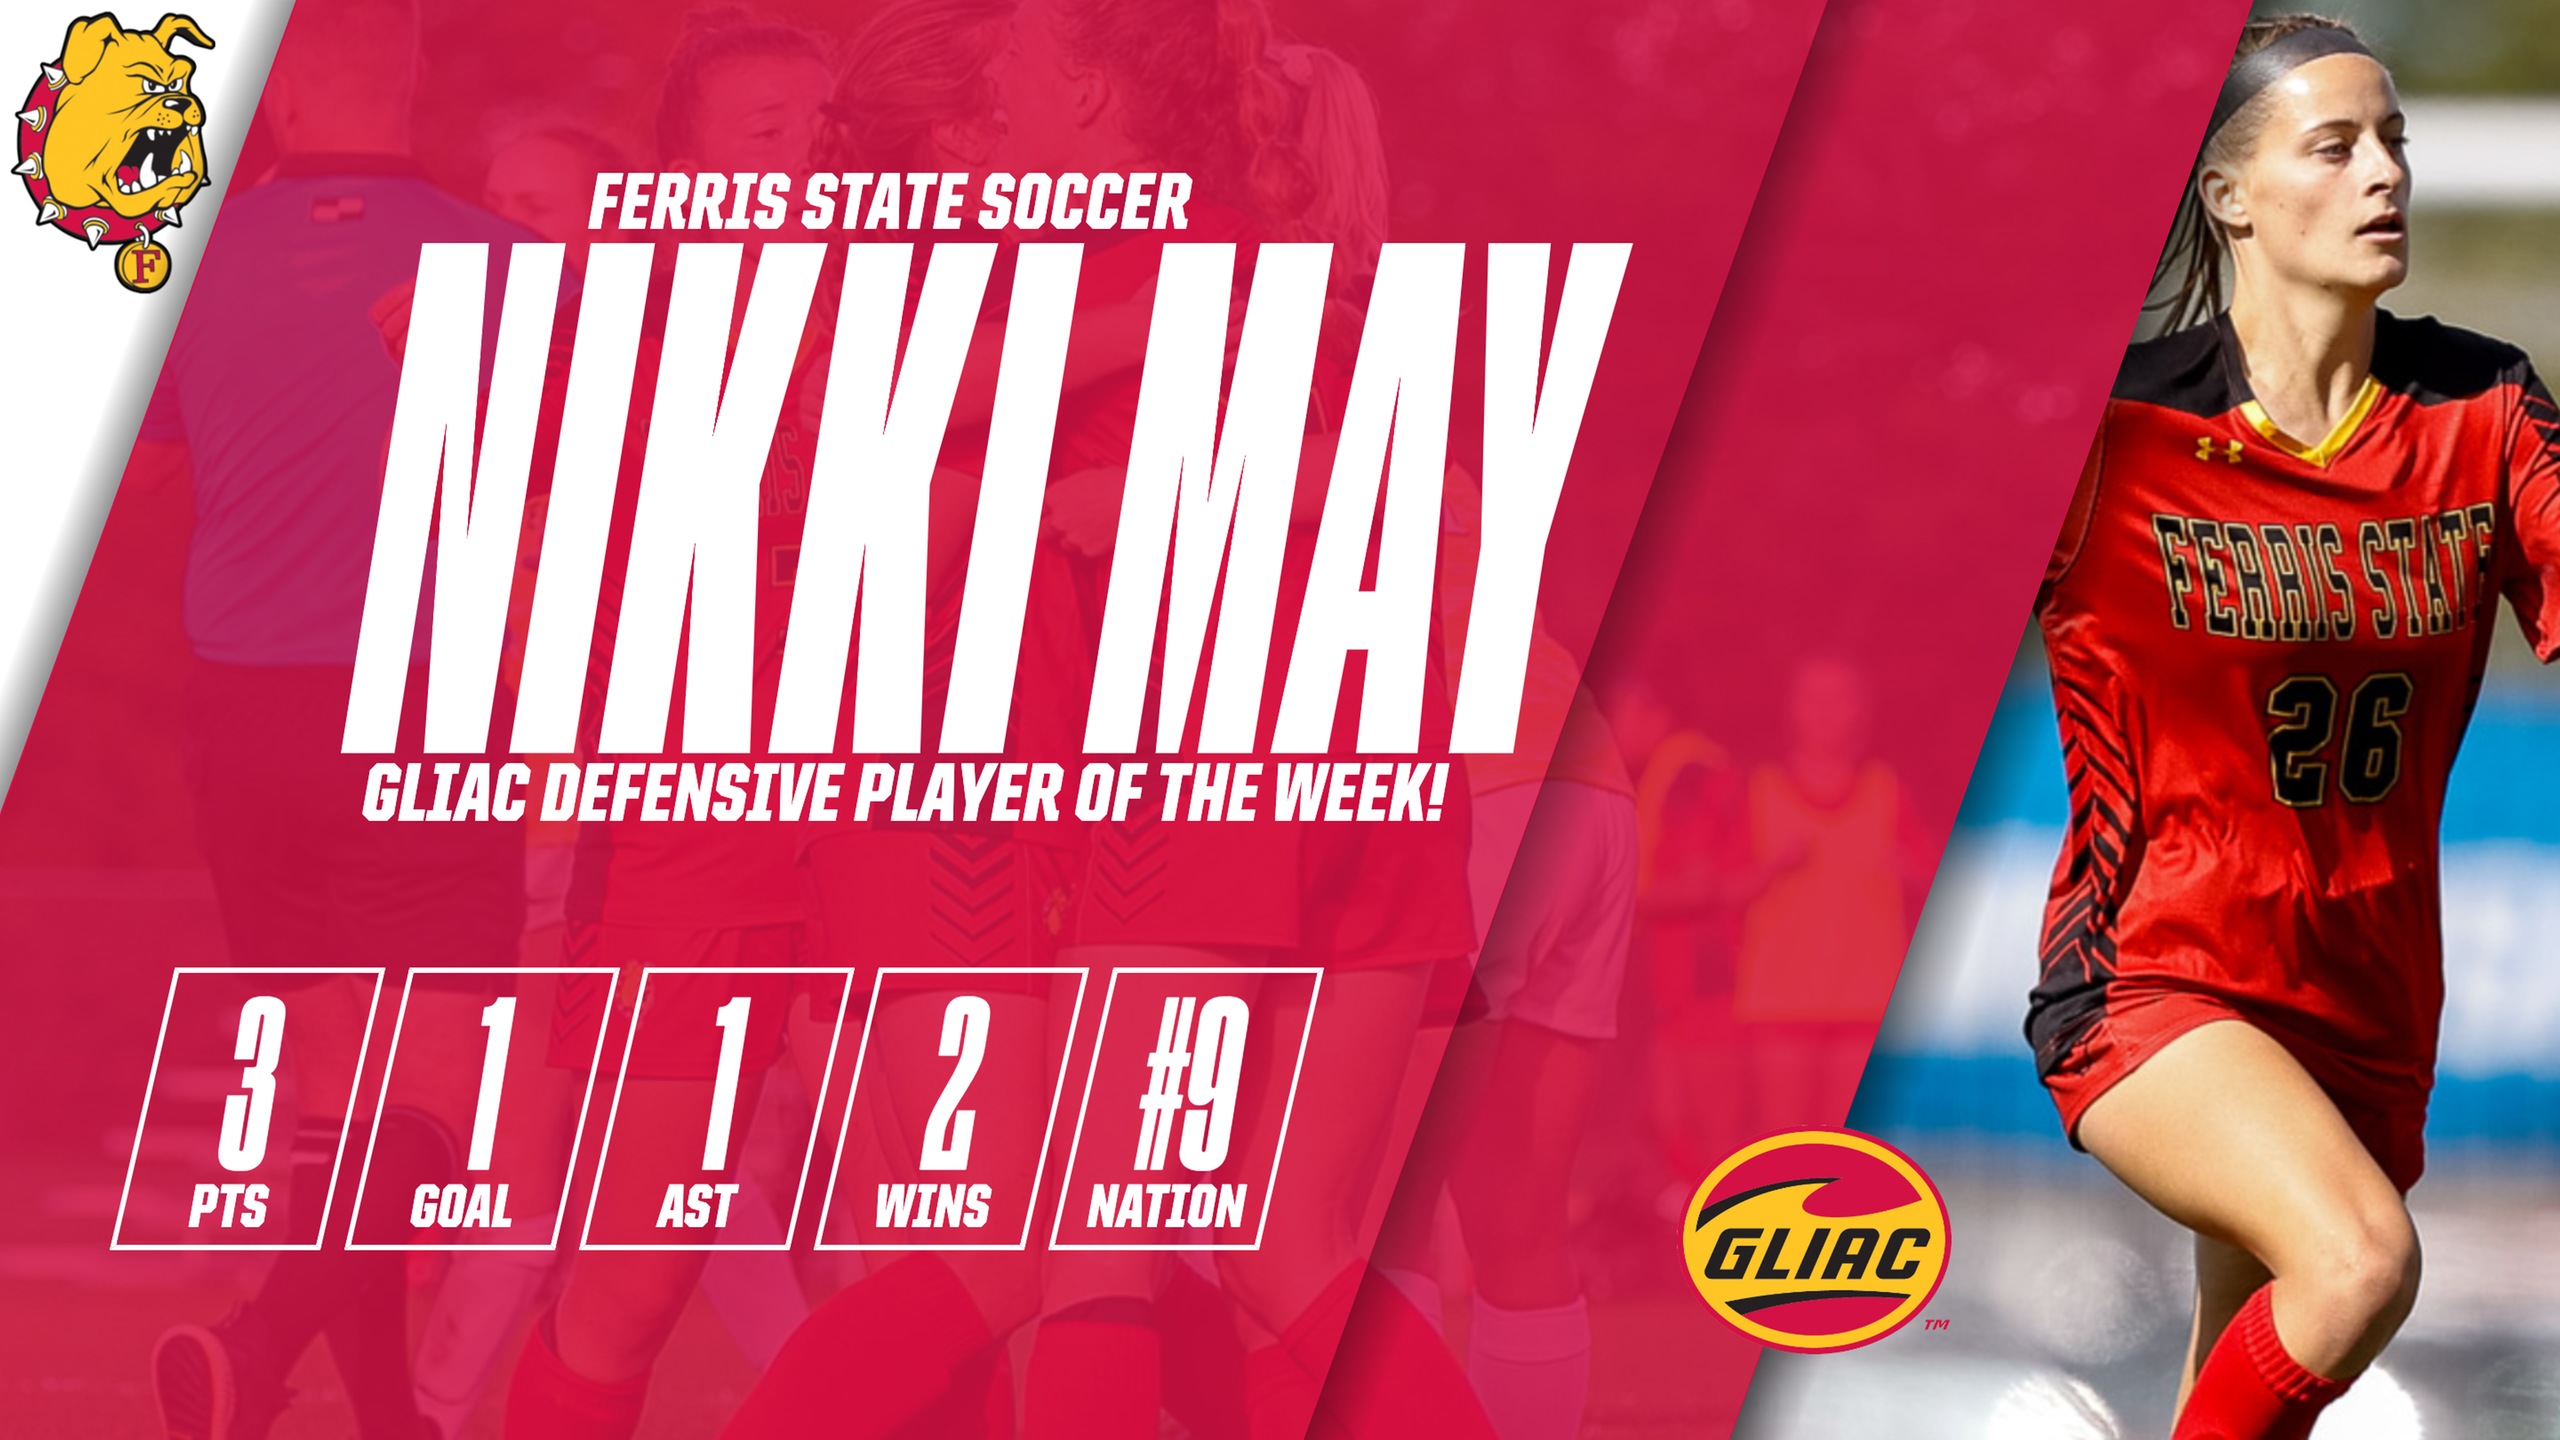 Ferris State's Nikki May Receives Recognition As GLIAC Soccer Defensive Player Of The Week